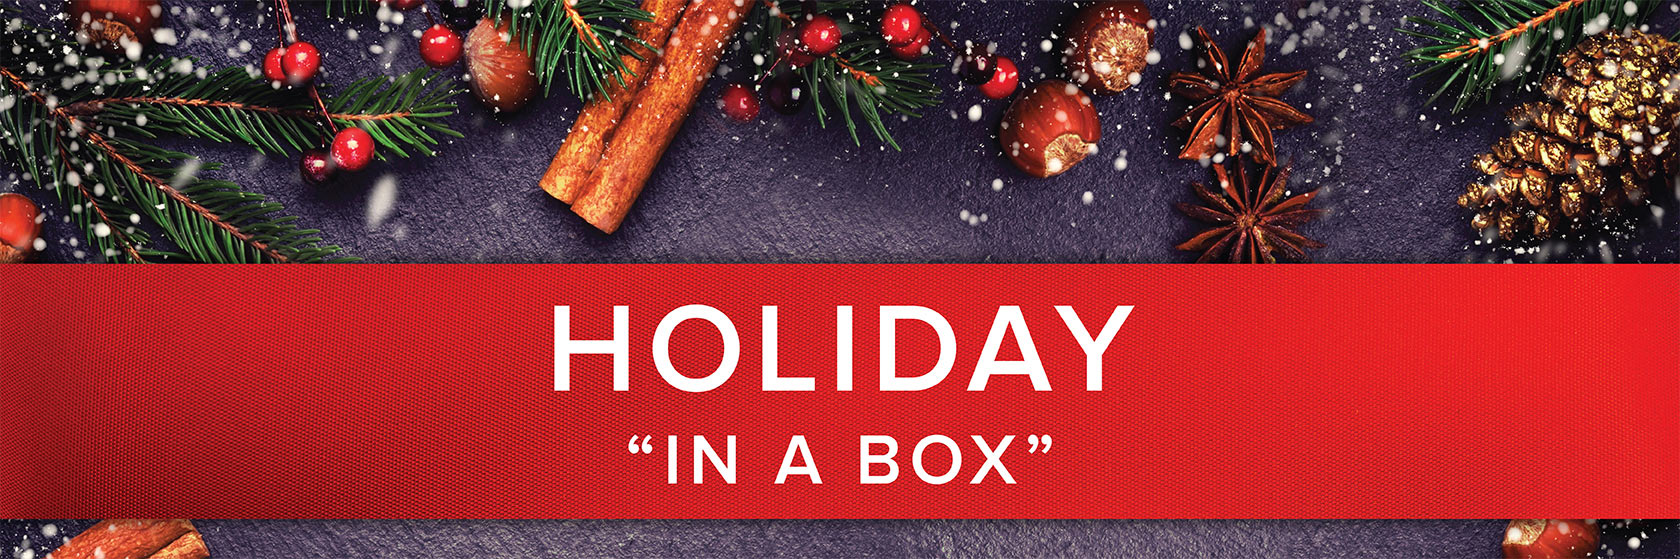 Holiday “In a Box”